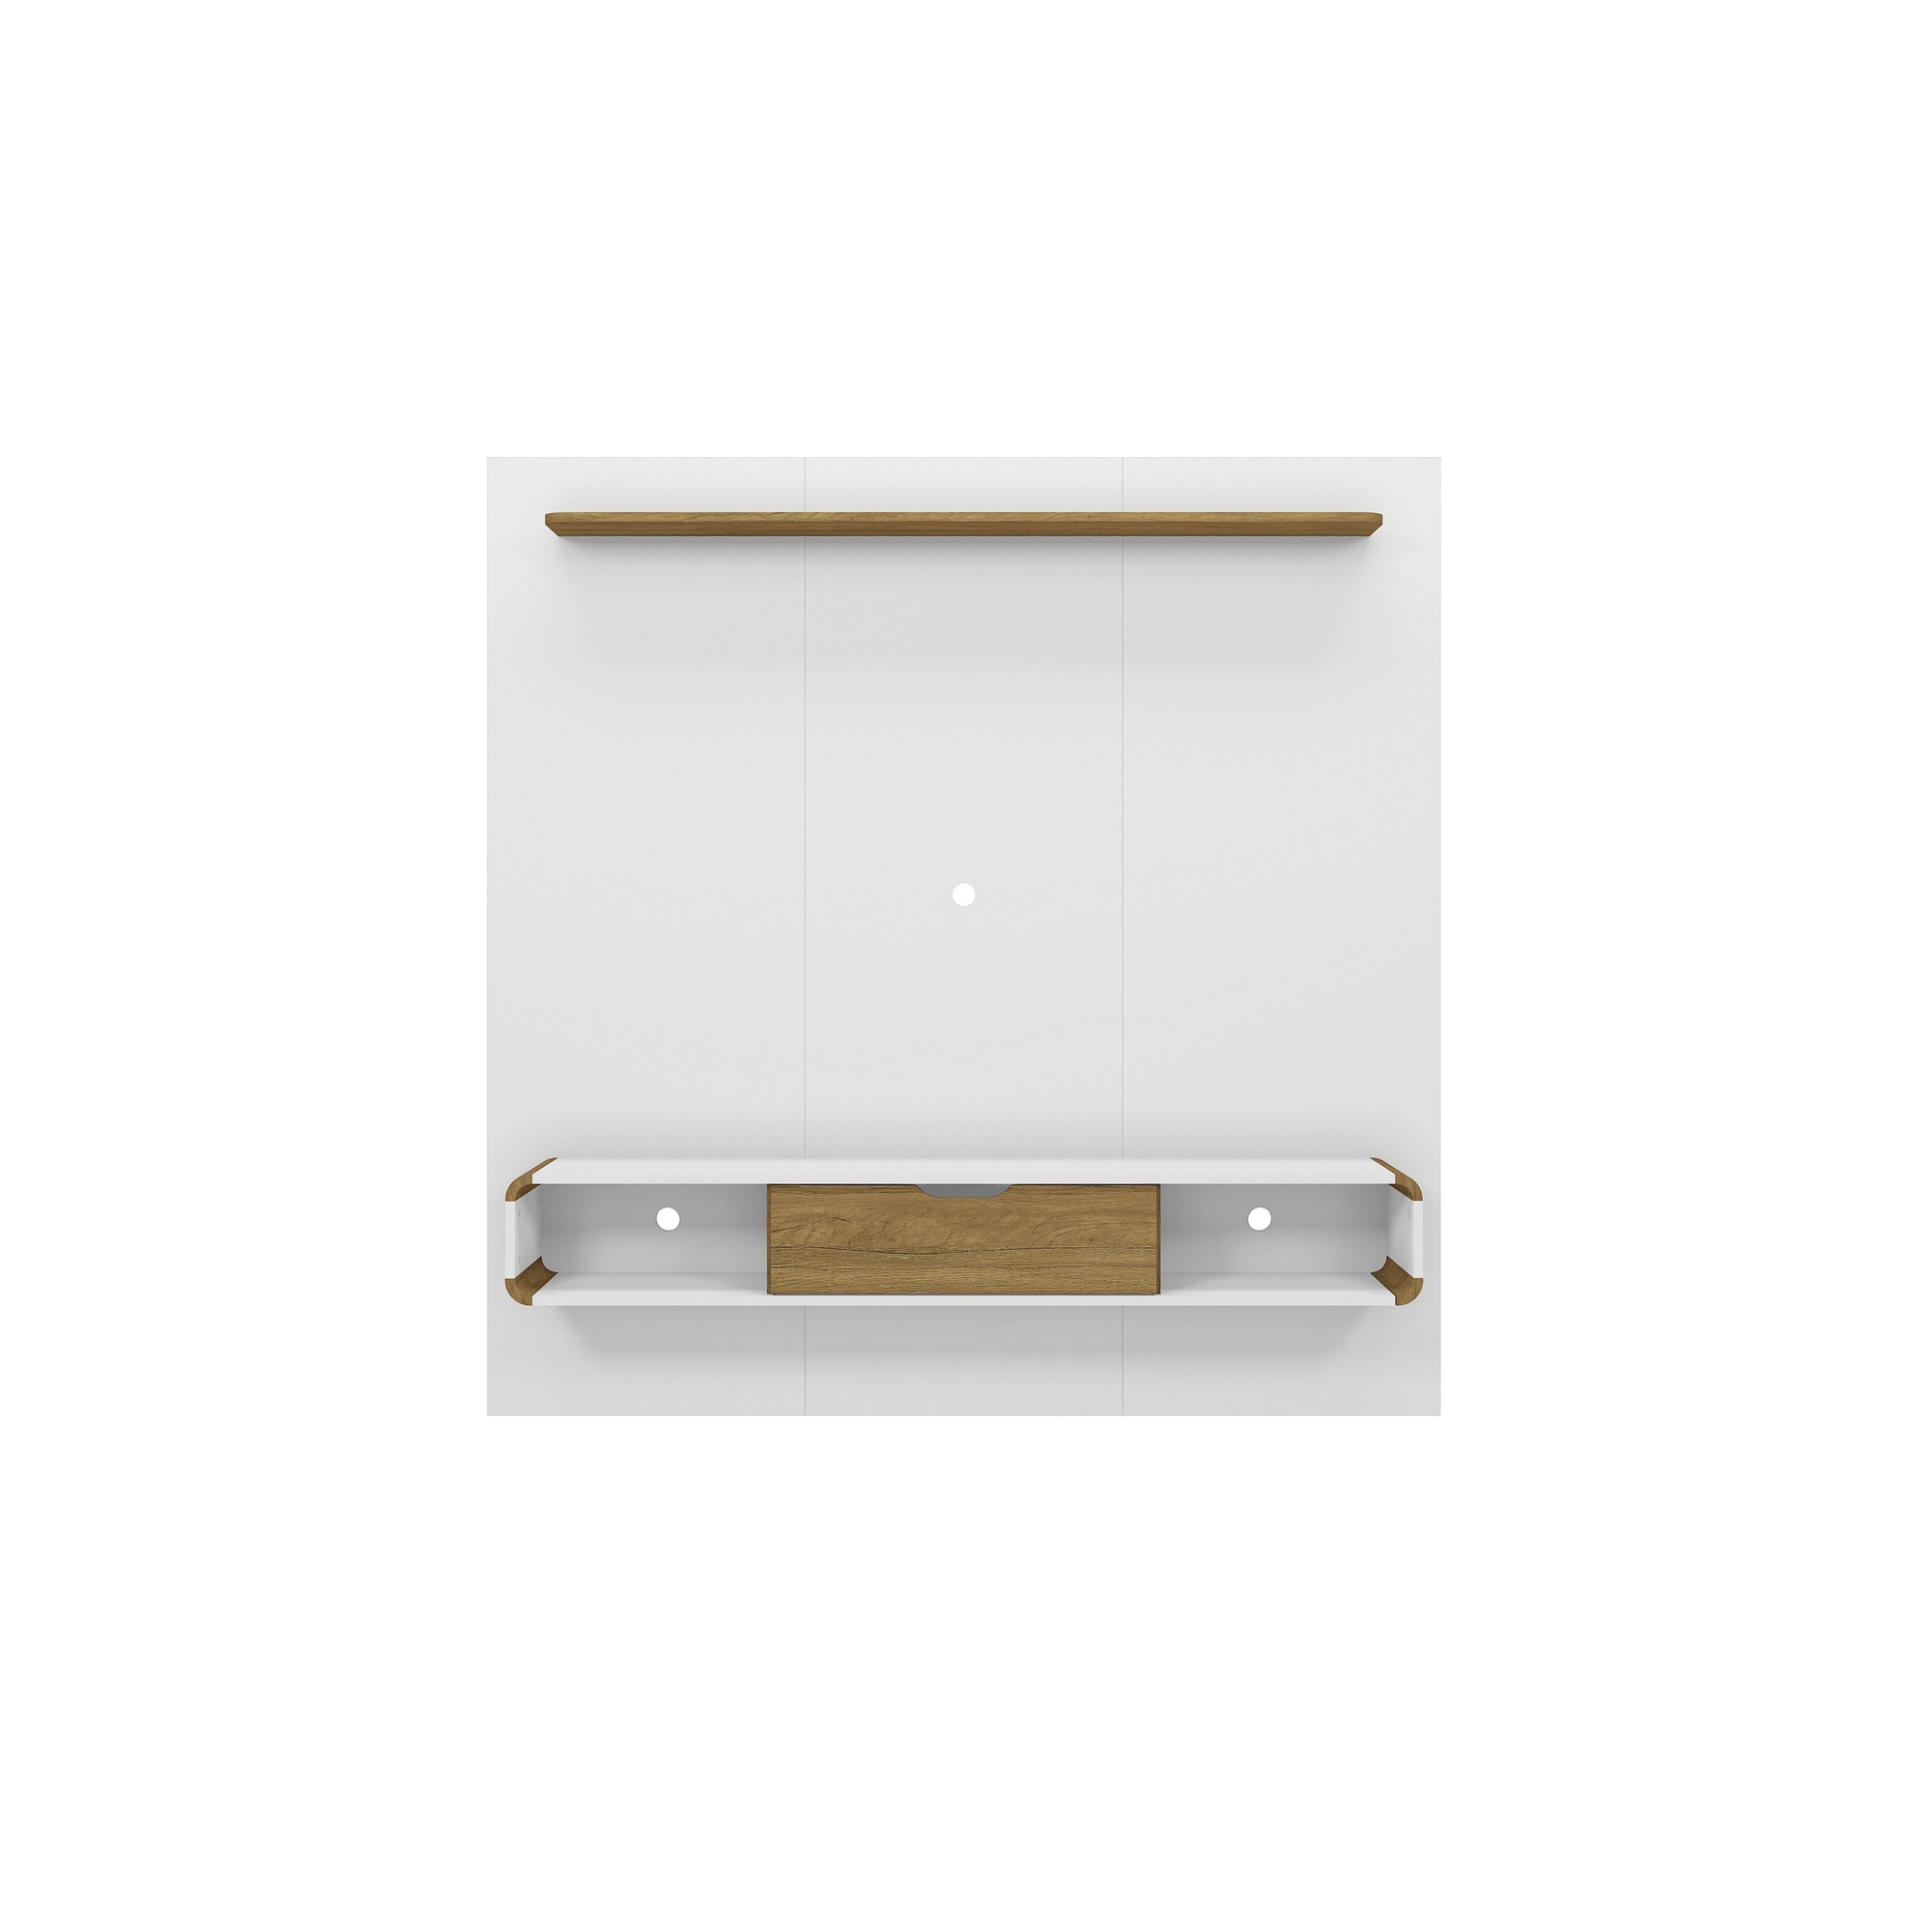 Manhattan Comfort, Camberly 62.36 Floating Ent Cntr 3 Shelves White, Width 62.36 in, Height 63.19 in, Depth 11.65 in, Model 247BMC